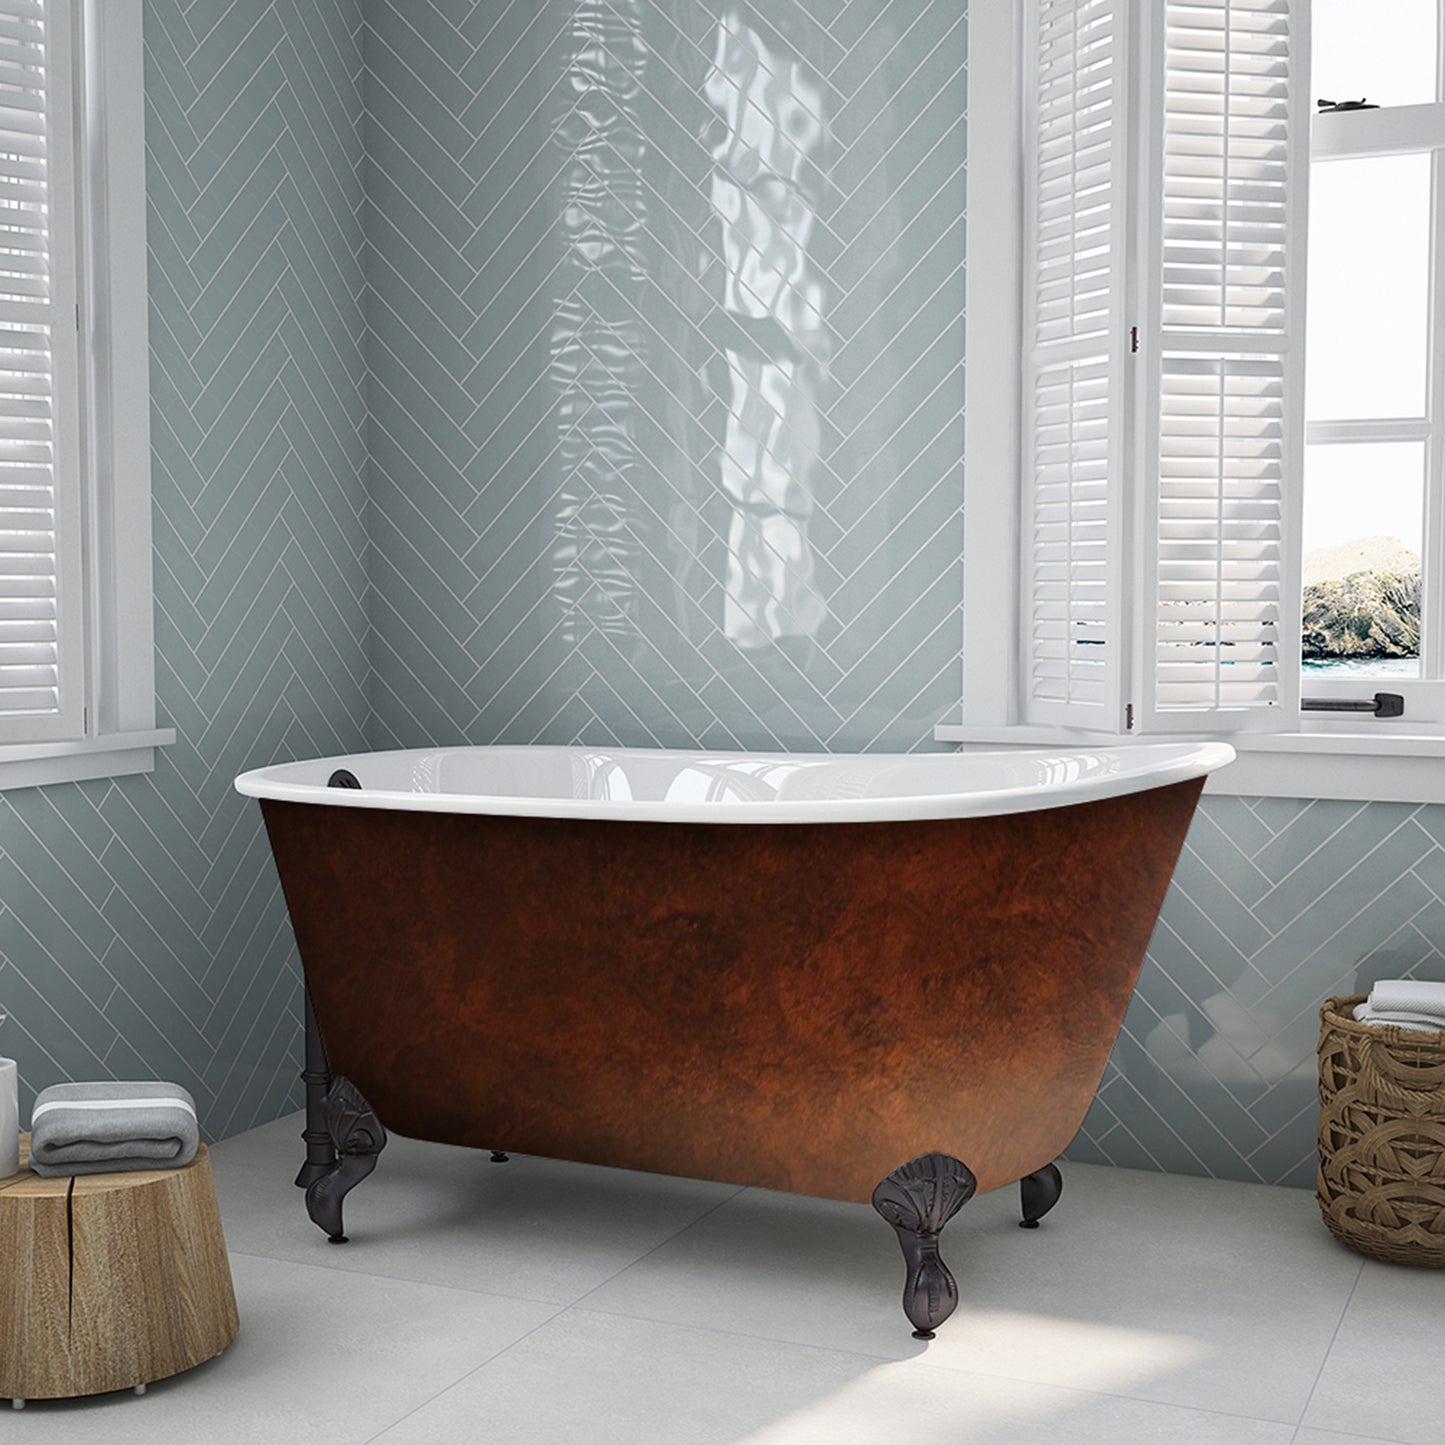 Cambridge Plumbing Cast Iron Clawfoot Bathtub 54" X 30" Faux Copper Bronze Finish on Exterior with No Faucet Drillings and Oil Rubbed Bronze Feet - Luxe Bathroom Vanities